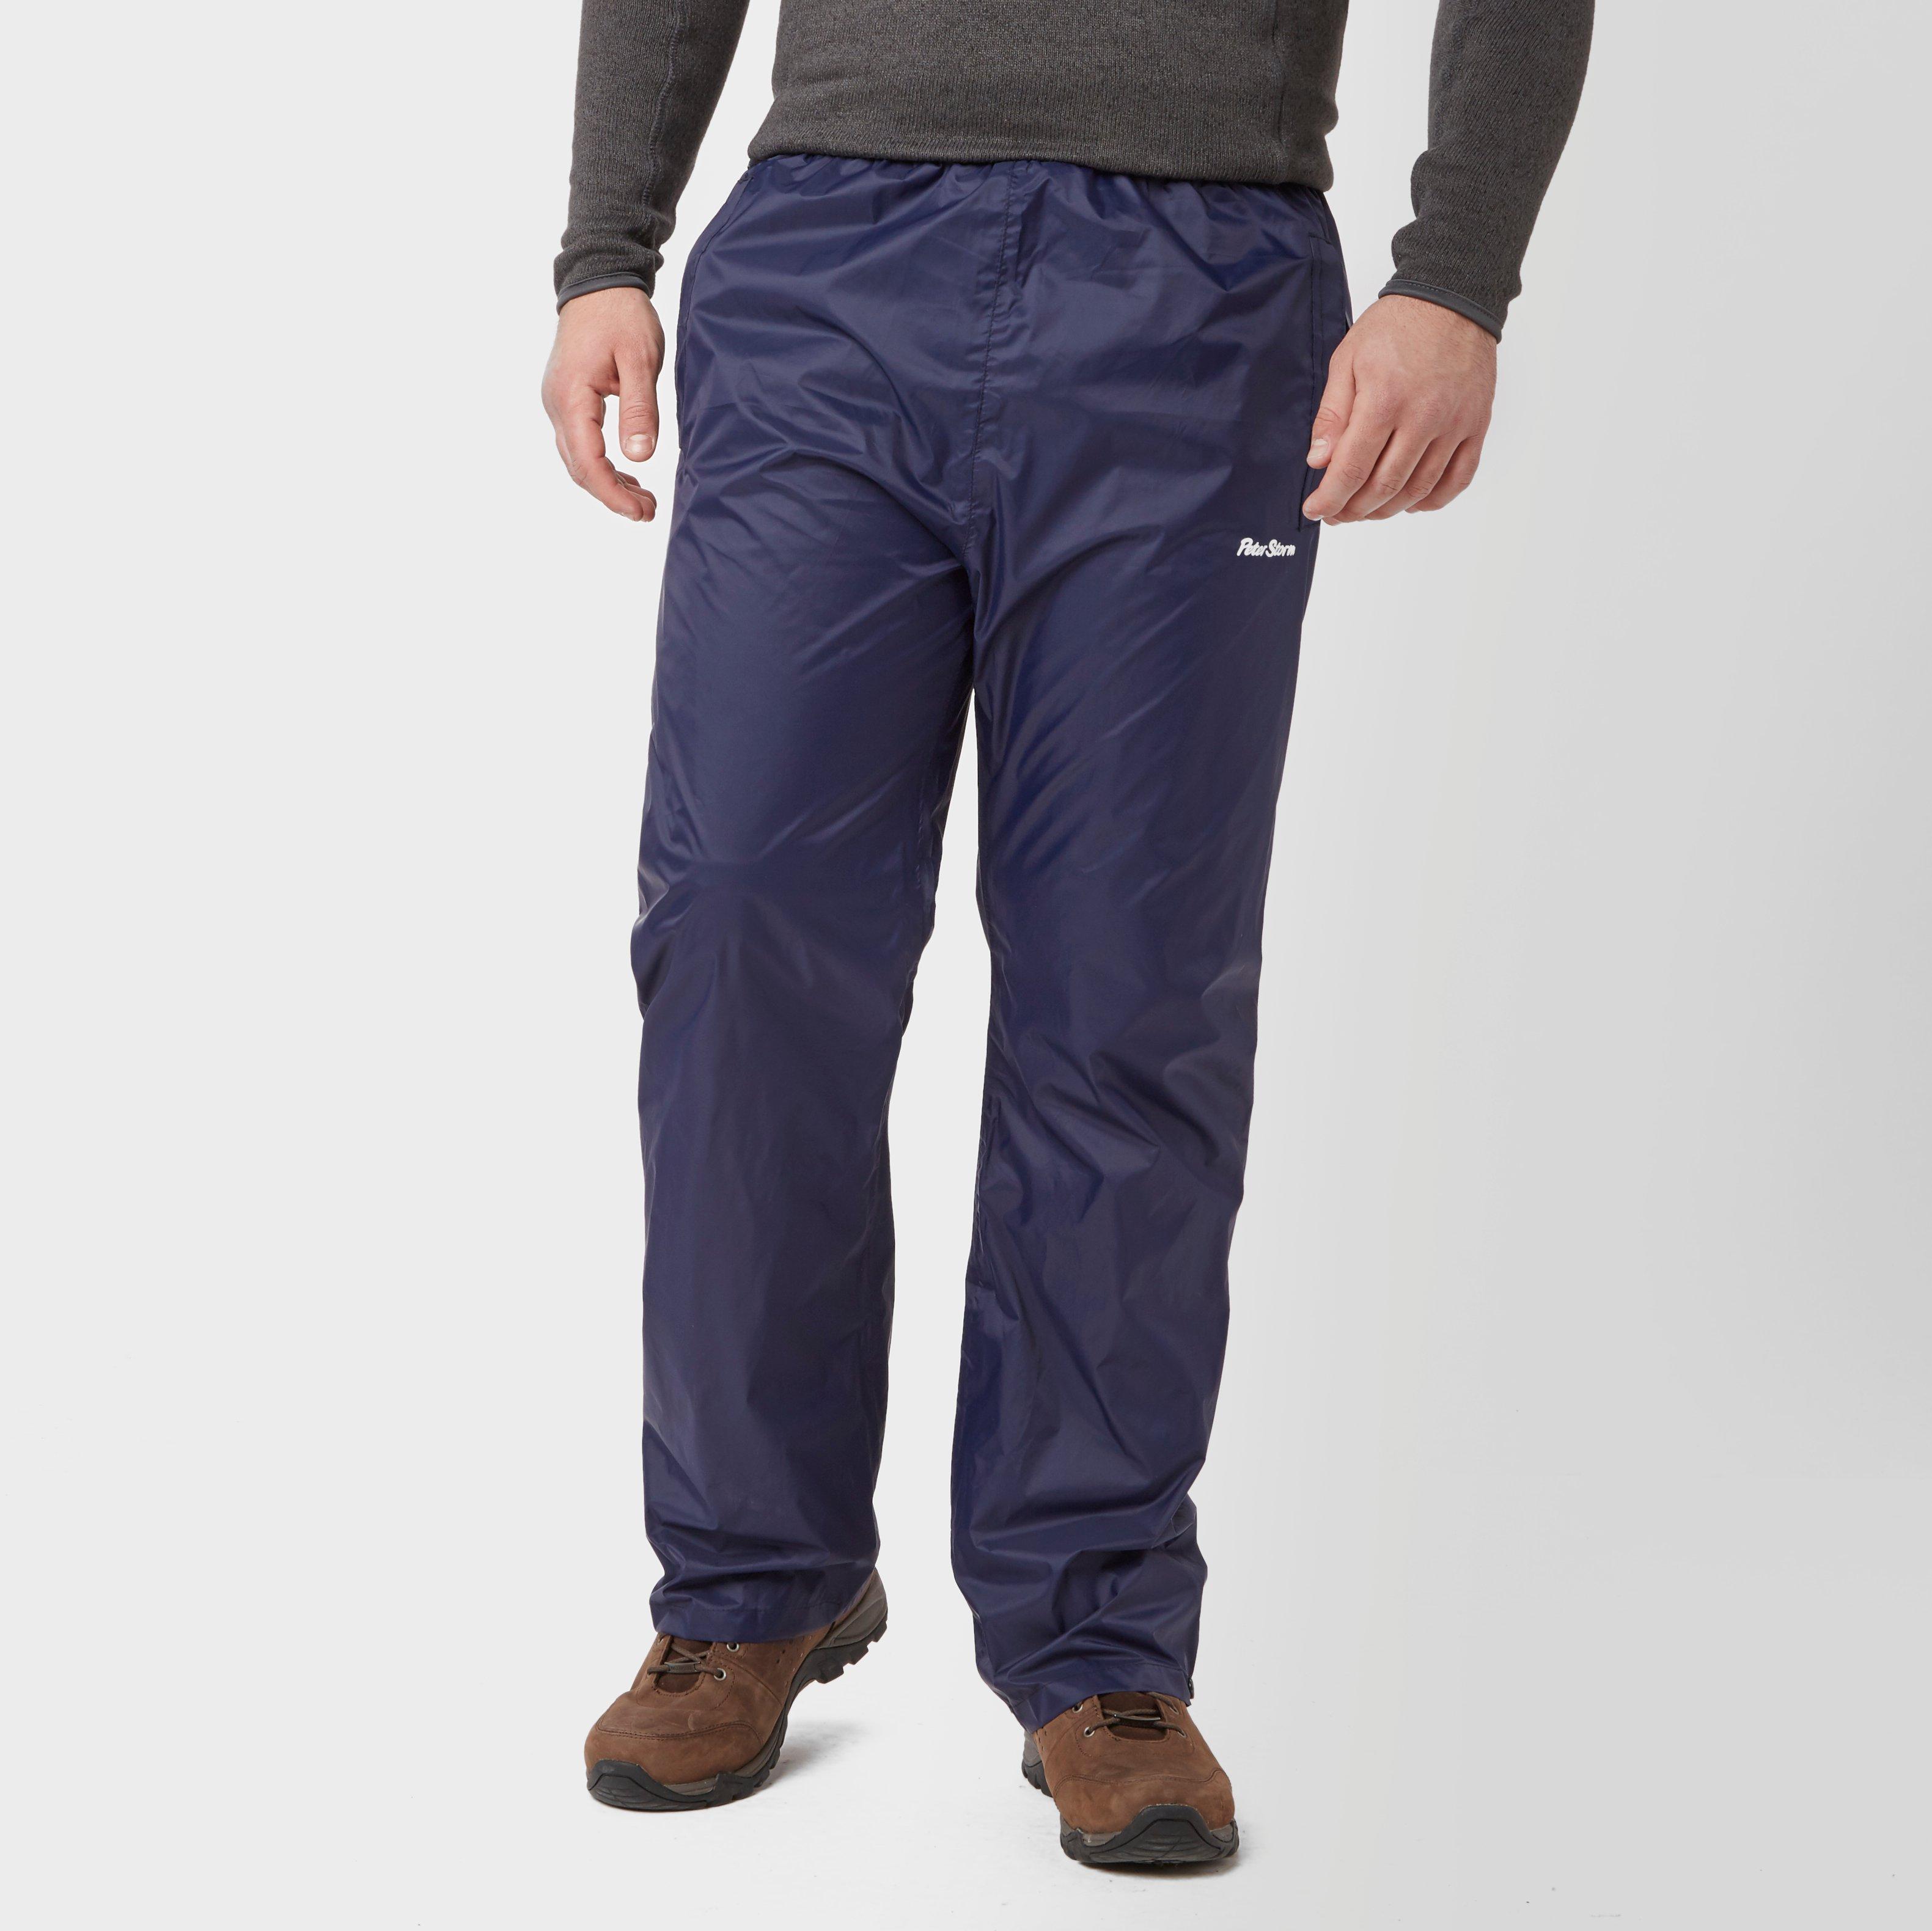 Peter Storm Mens Packable Pants - Navy/nvy  Navy/nvy